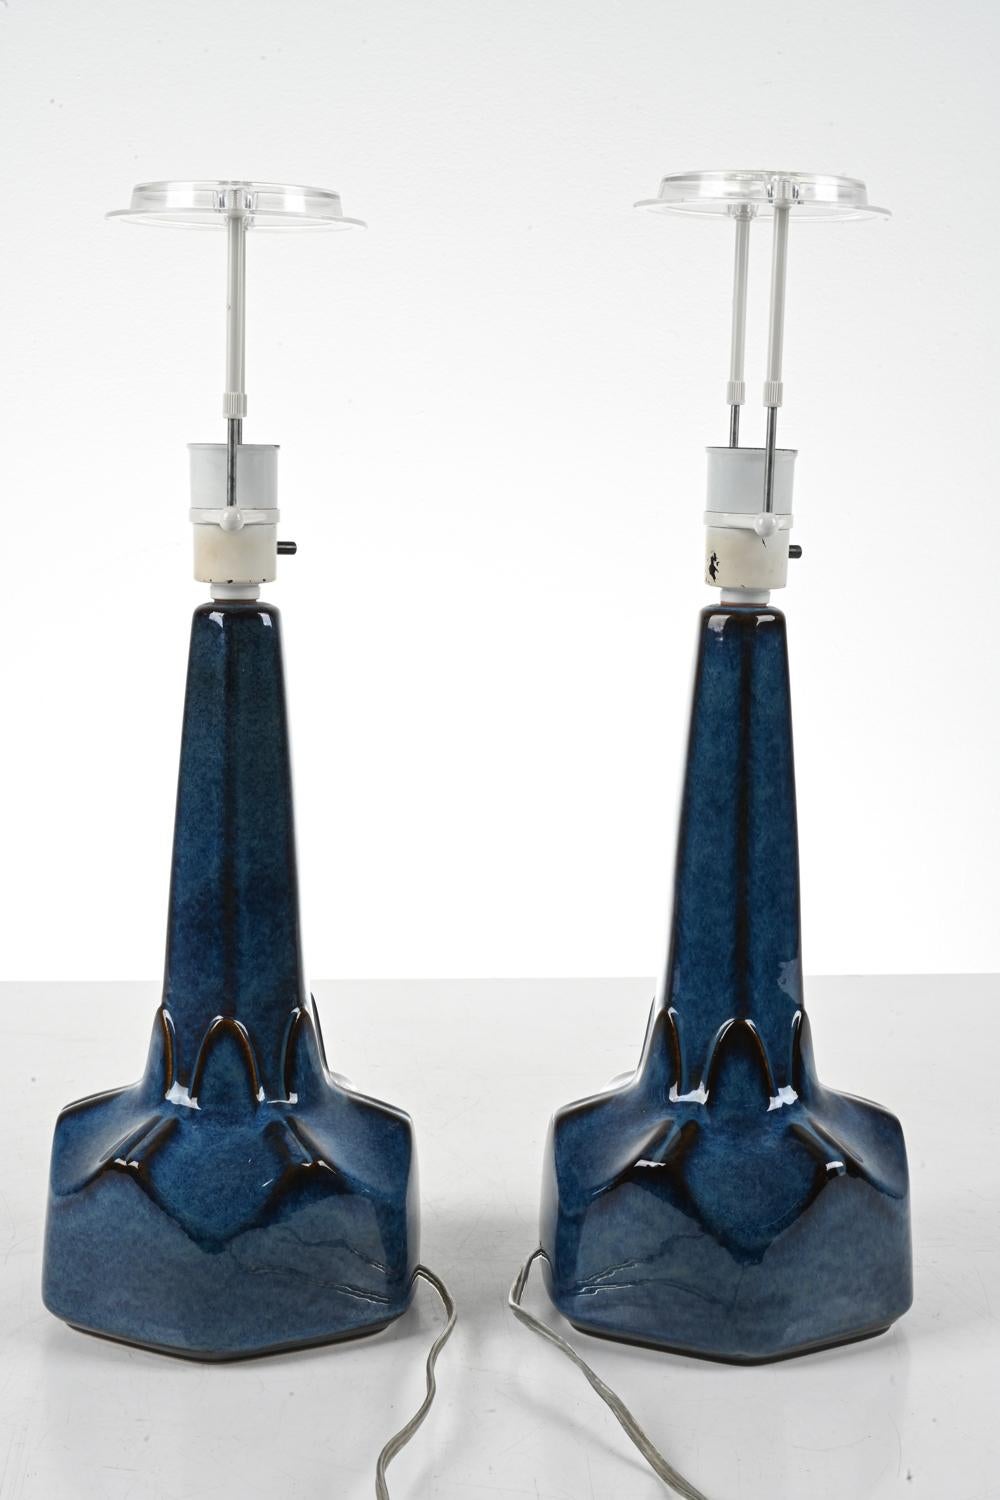 Pair Søholm Table Lamps, Dark Blue Stoneware, Denmark, 1960s For Sale 2